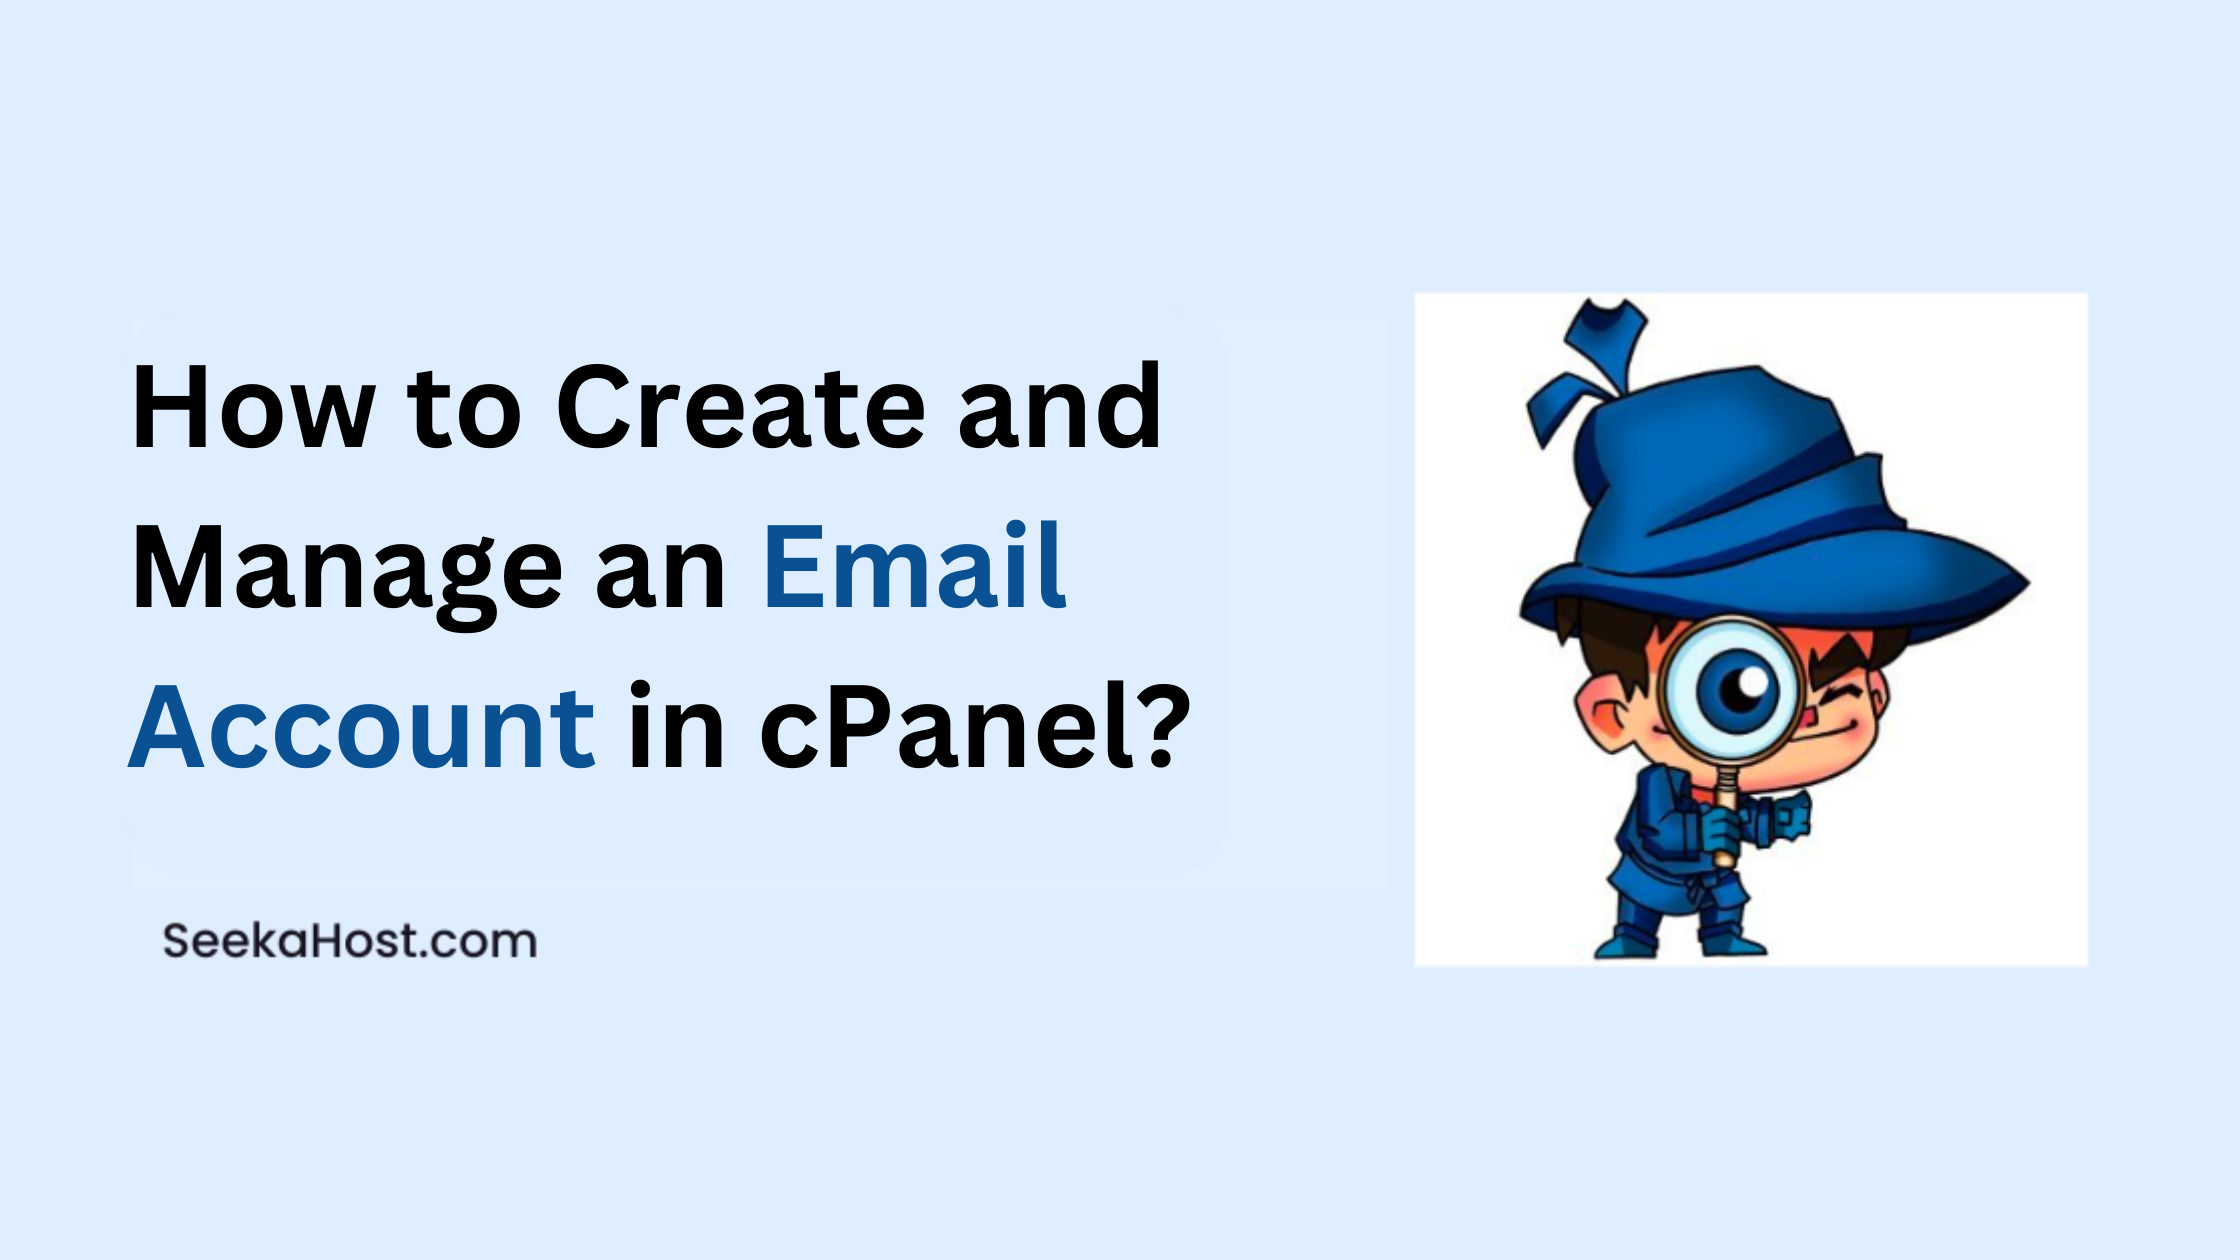 Create and Manage an Email Account in cPanel